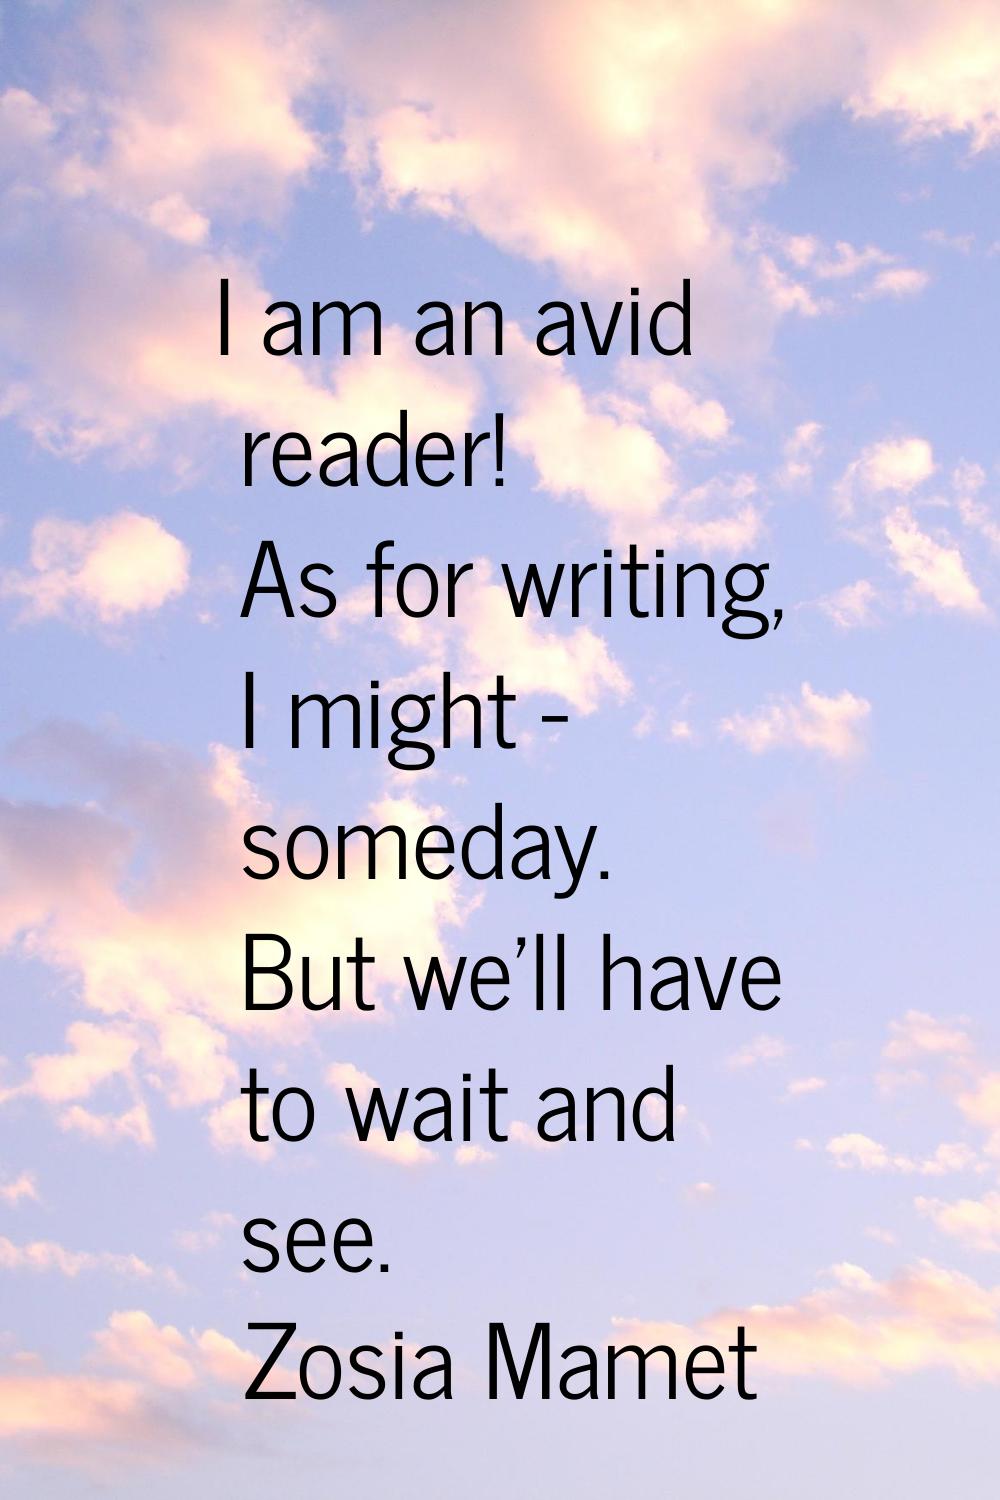 I am an avid reader! As for writing, I might - someday. But we'll have to wait and see.